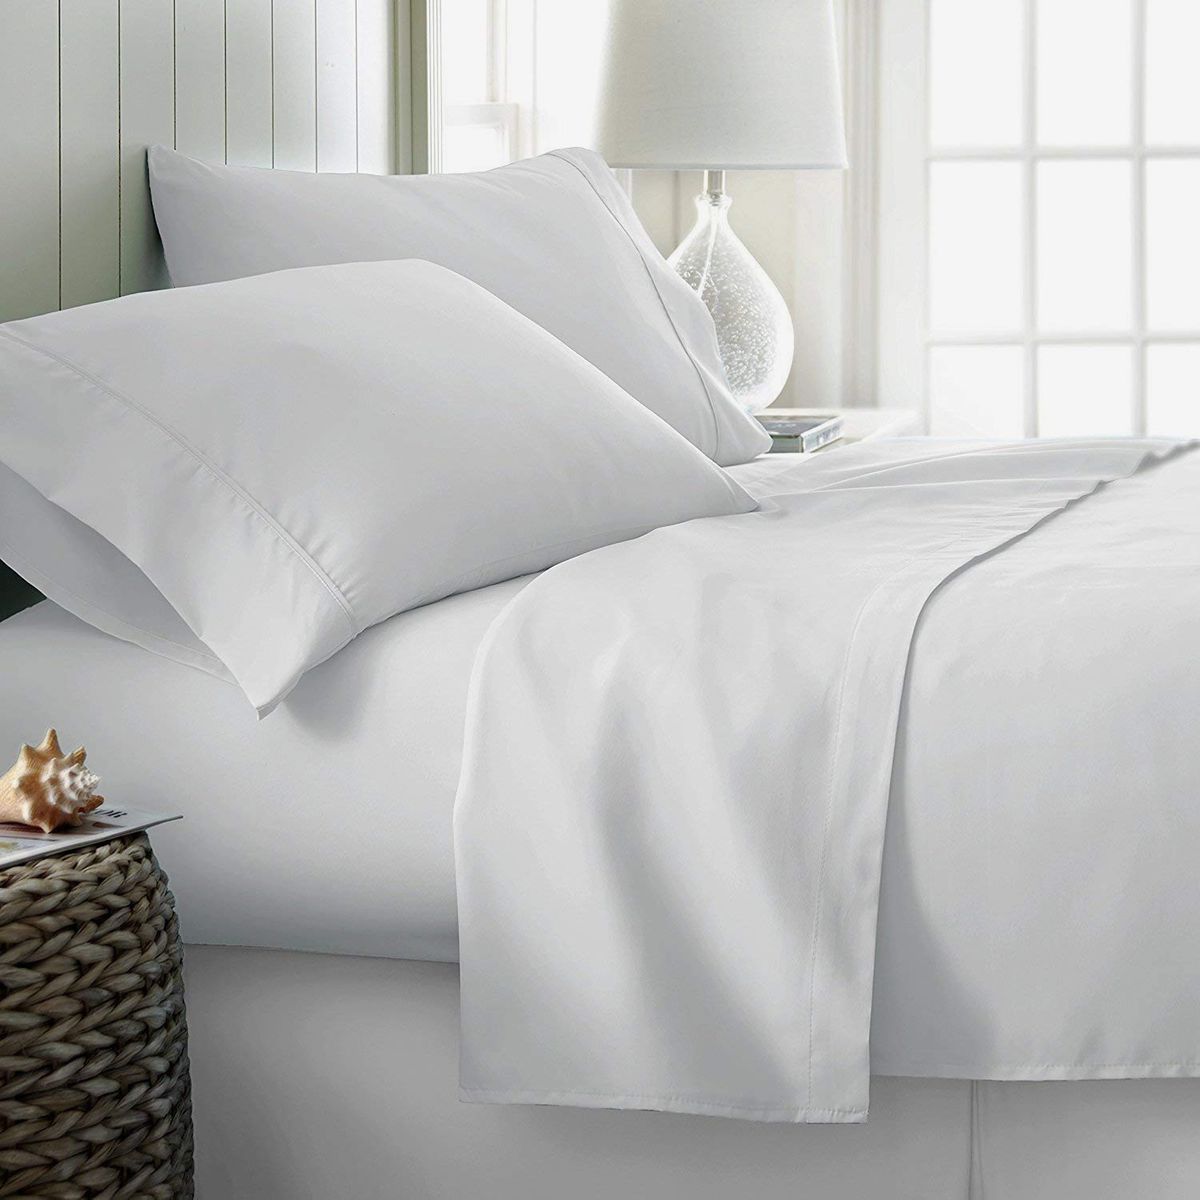 8 Best Egyptian-Cotton Sheets 2020 | The Strategist